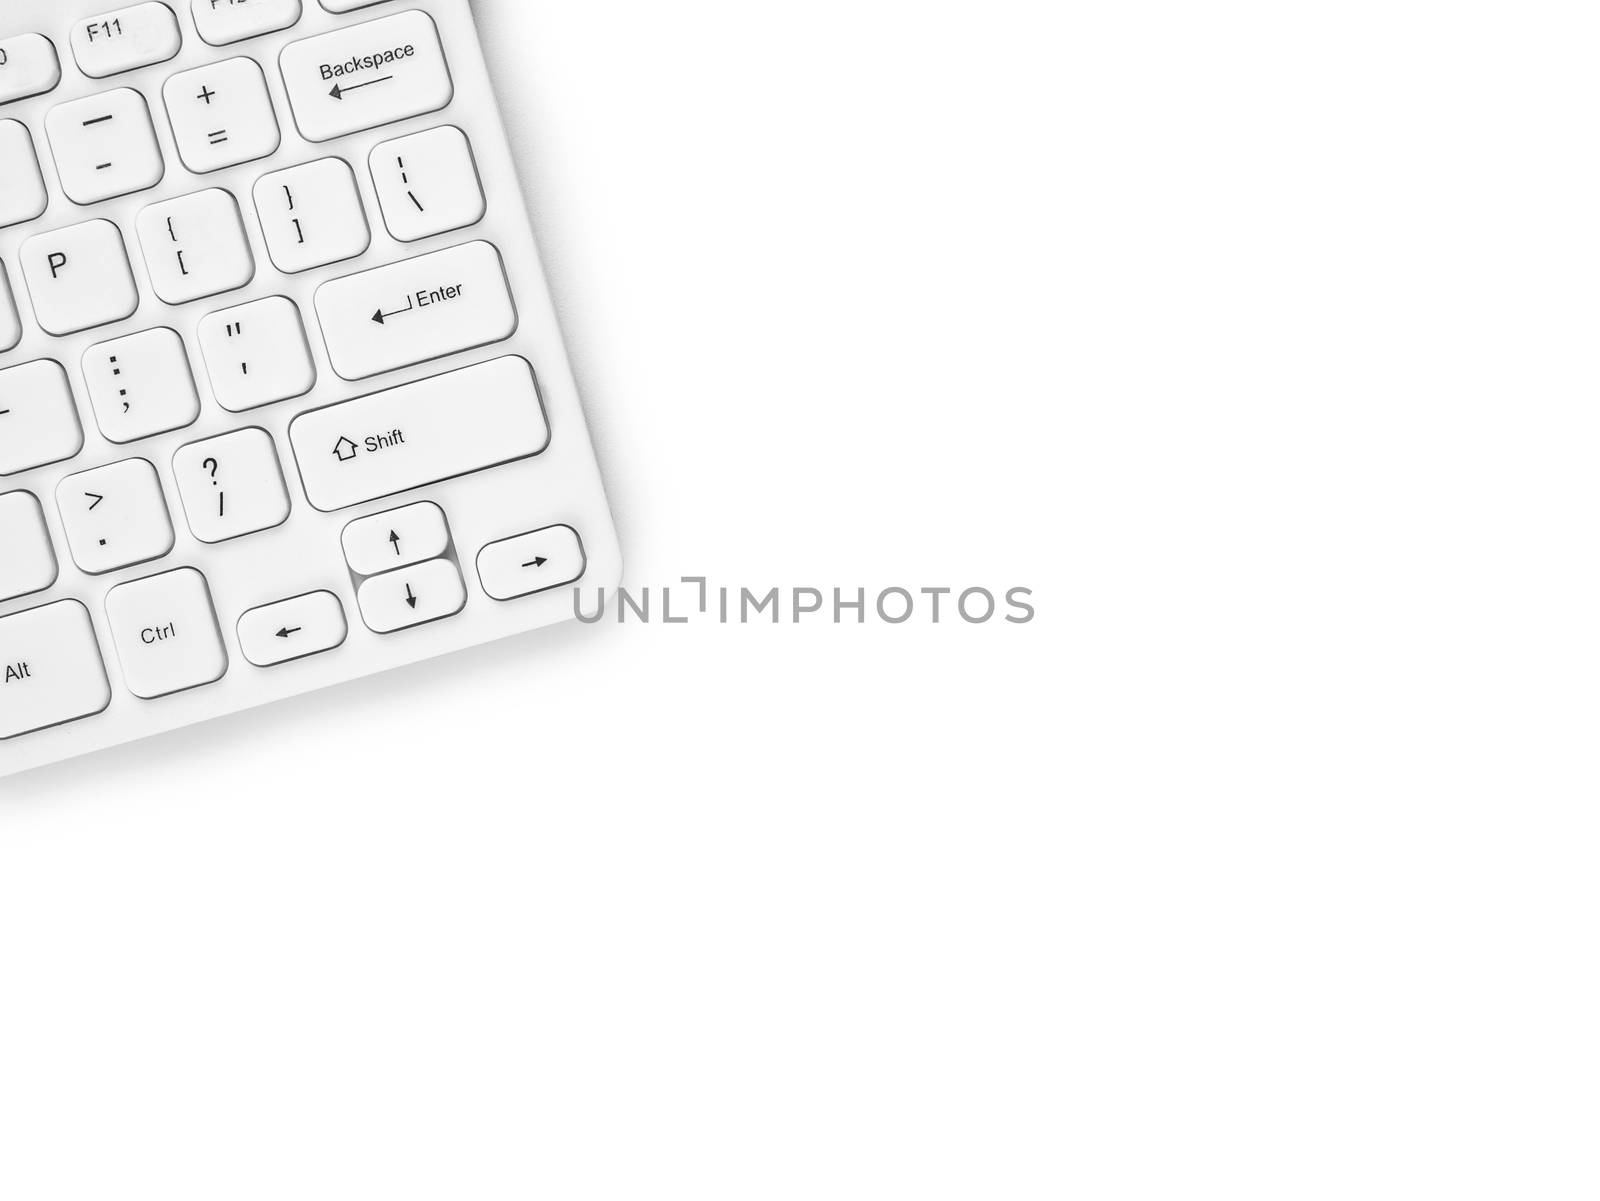 Modern wireless keyboard Isolated on white background with copy  by Amankris